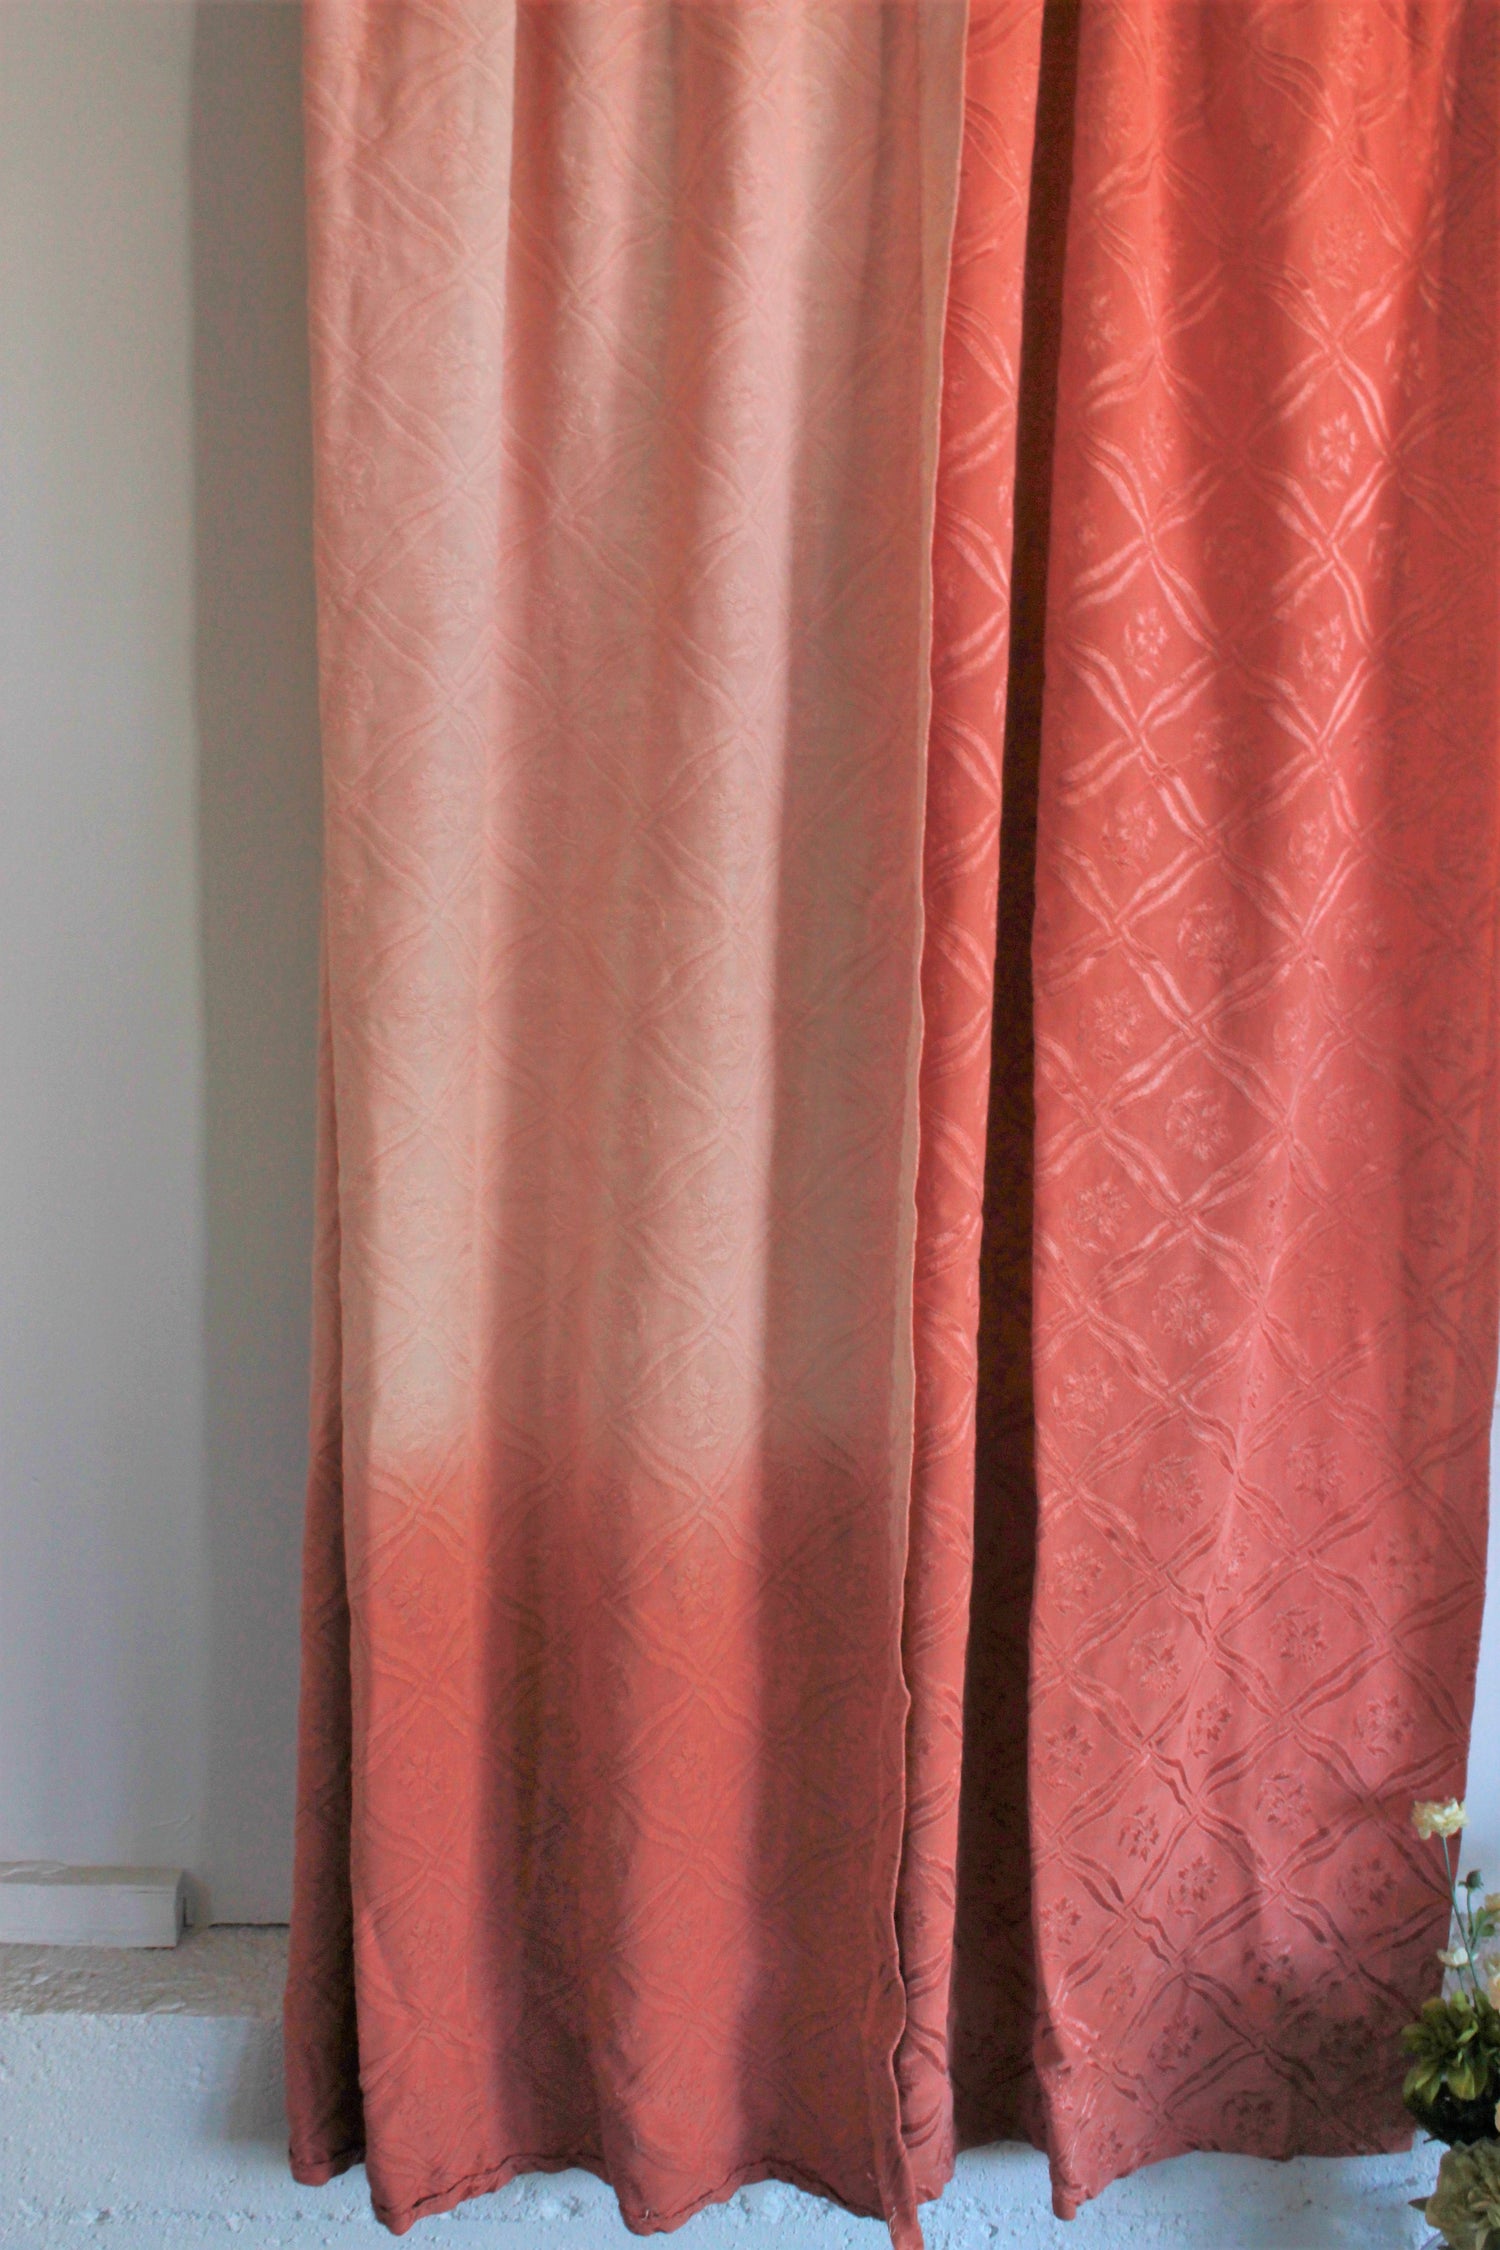 Vintage 1940s 1950s Curtain Panel in Pink Damask